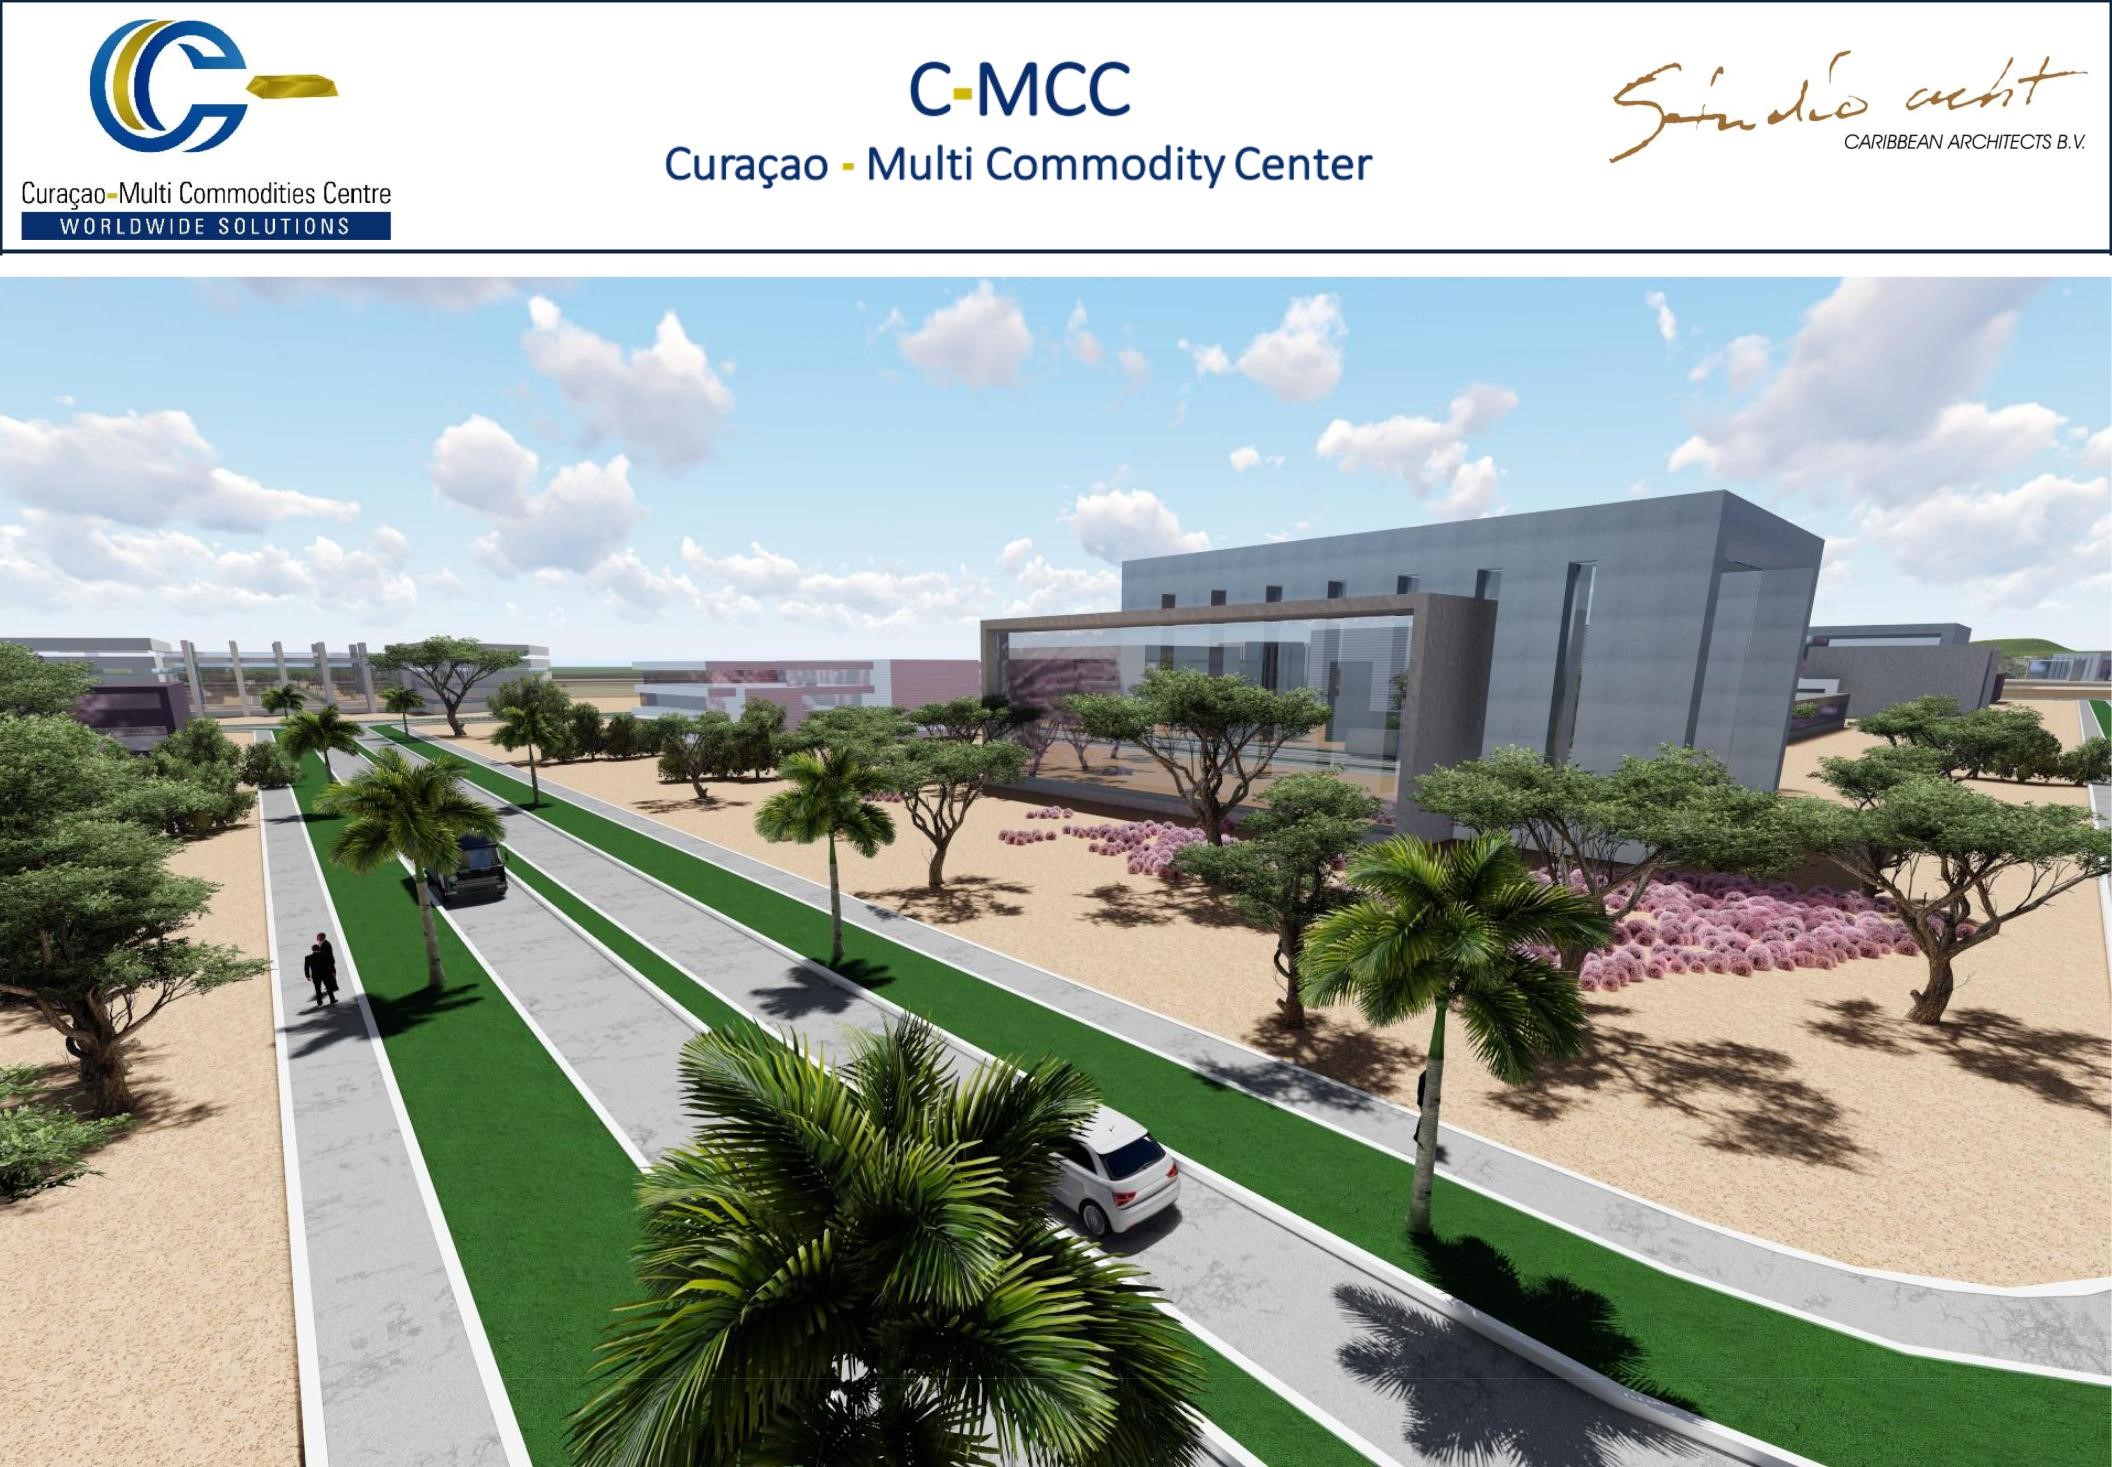 C-MCC Curacao Airport FTZ Site Elevations